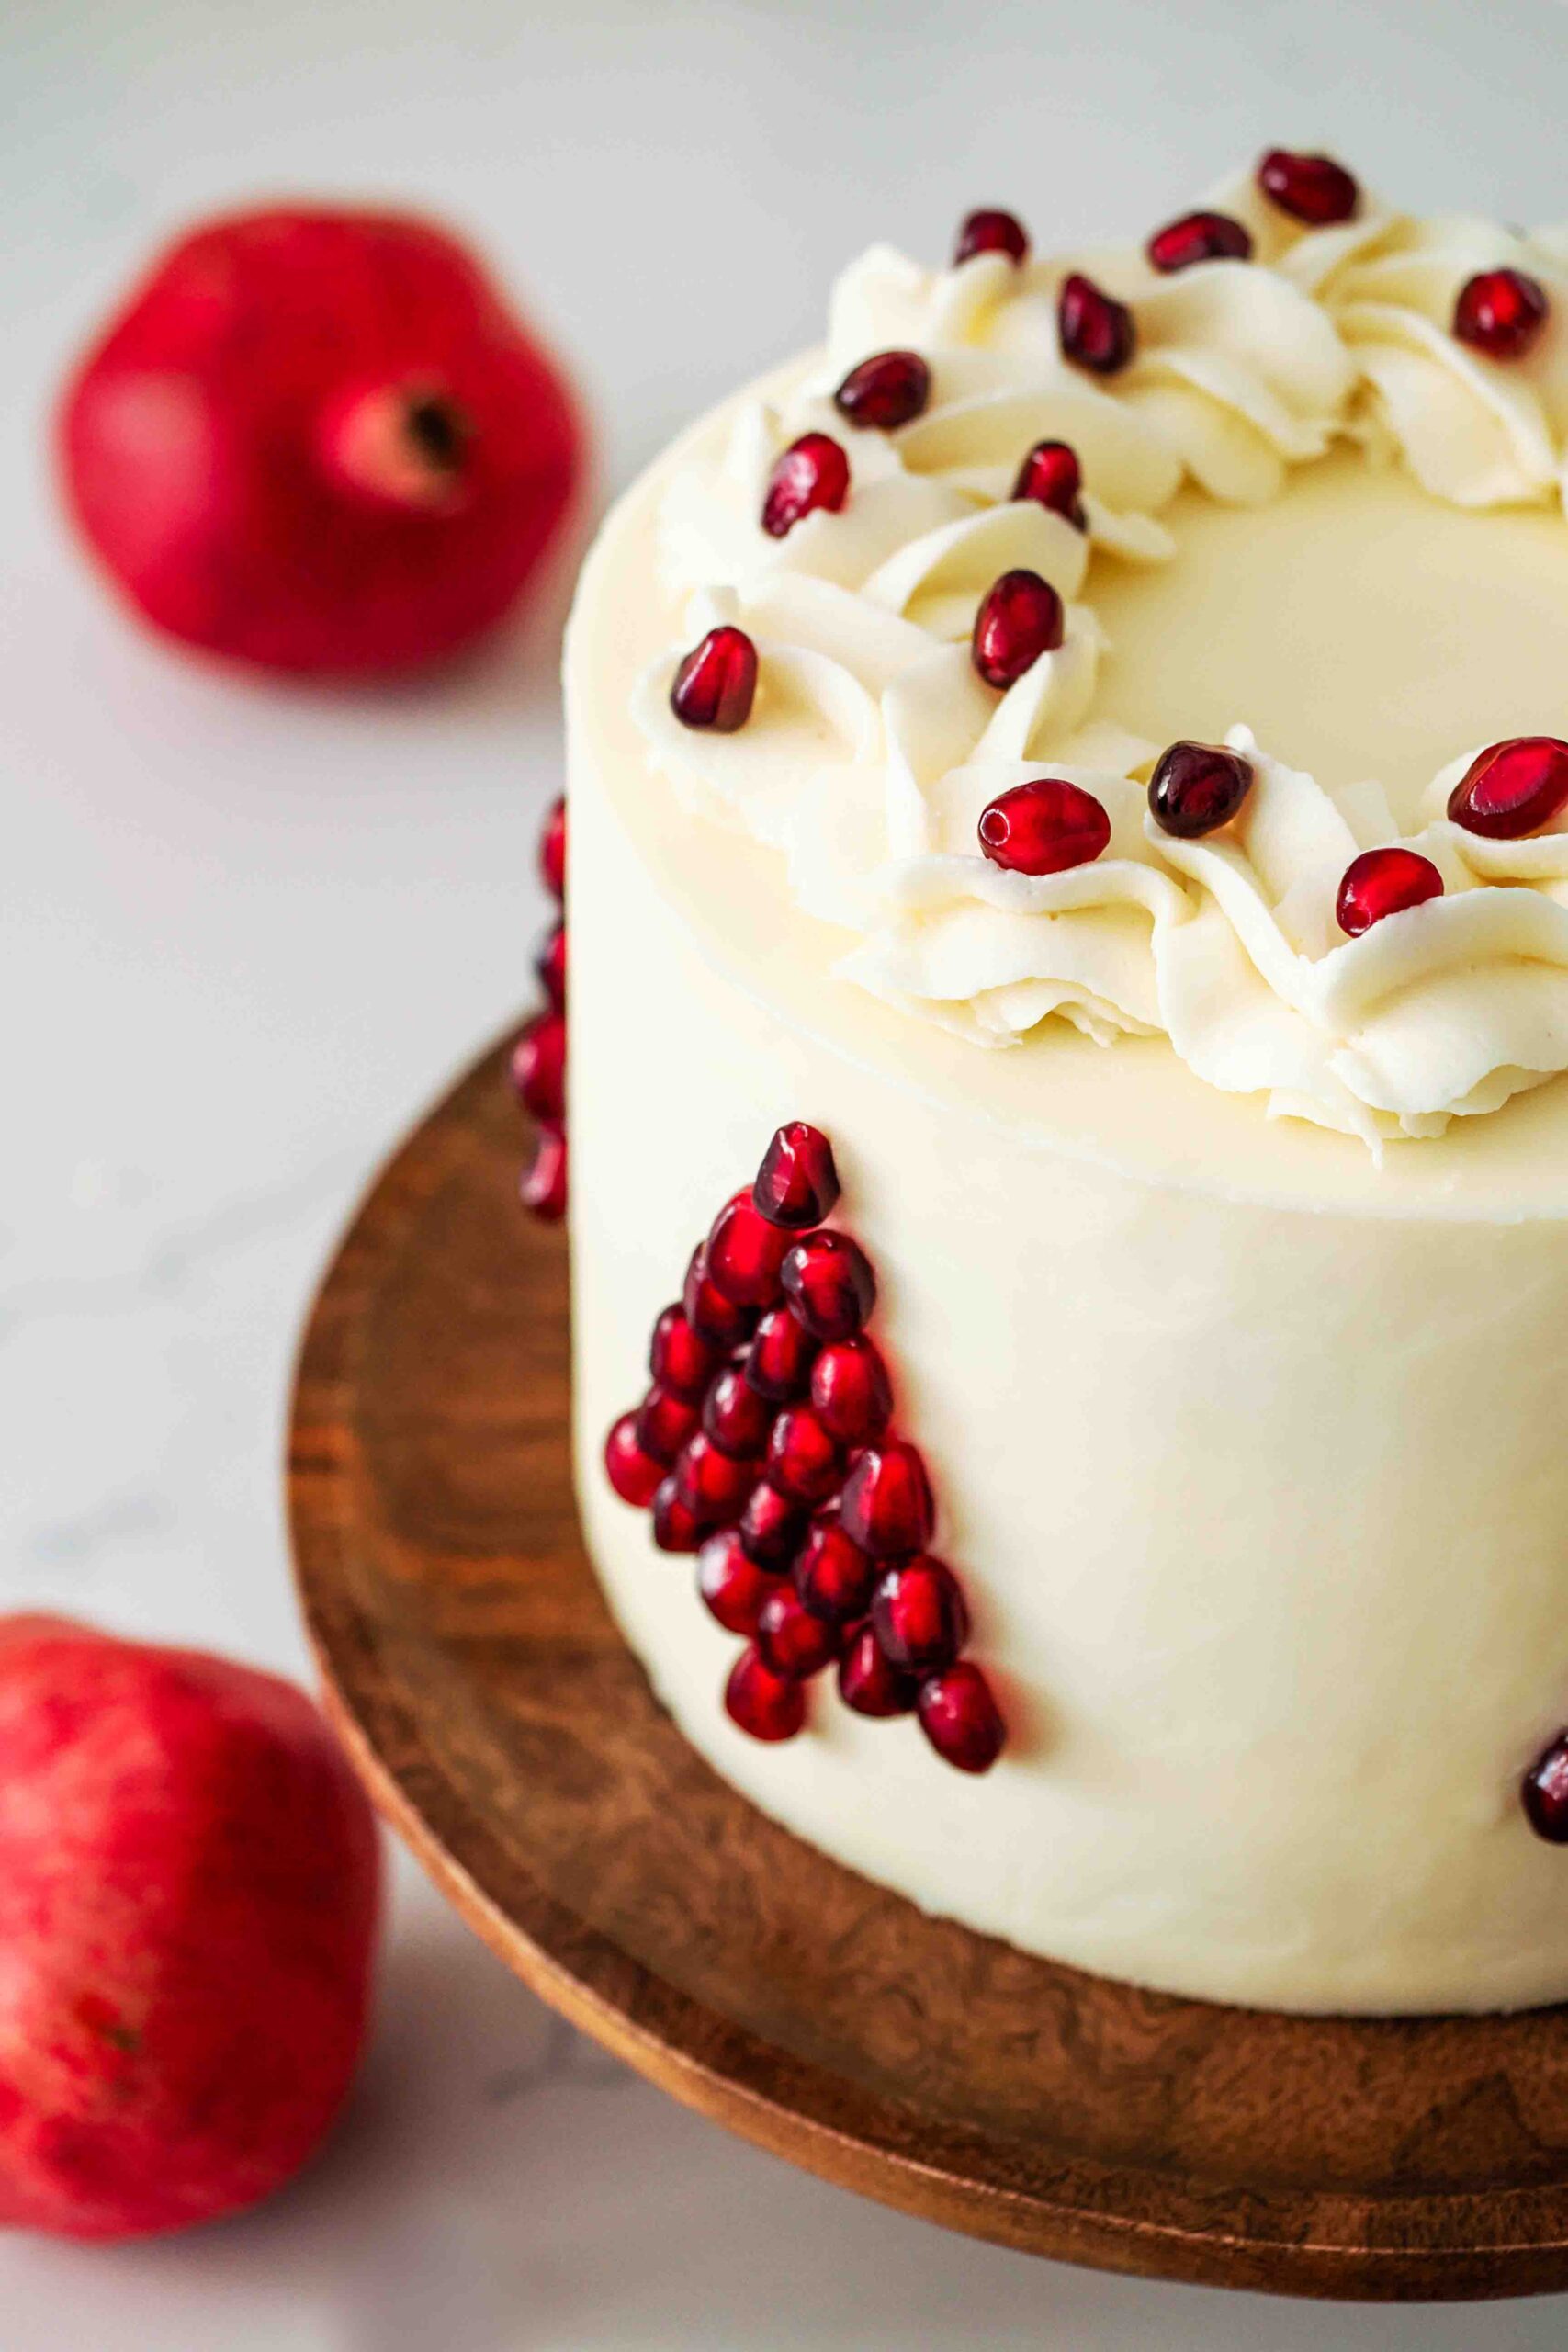 A white layer cake decorated with pomegranate seeds in the shape of a Christmas tree.